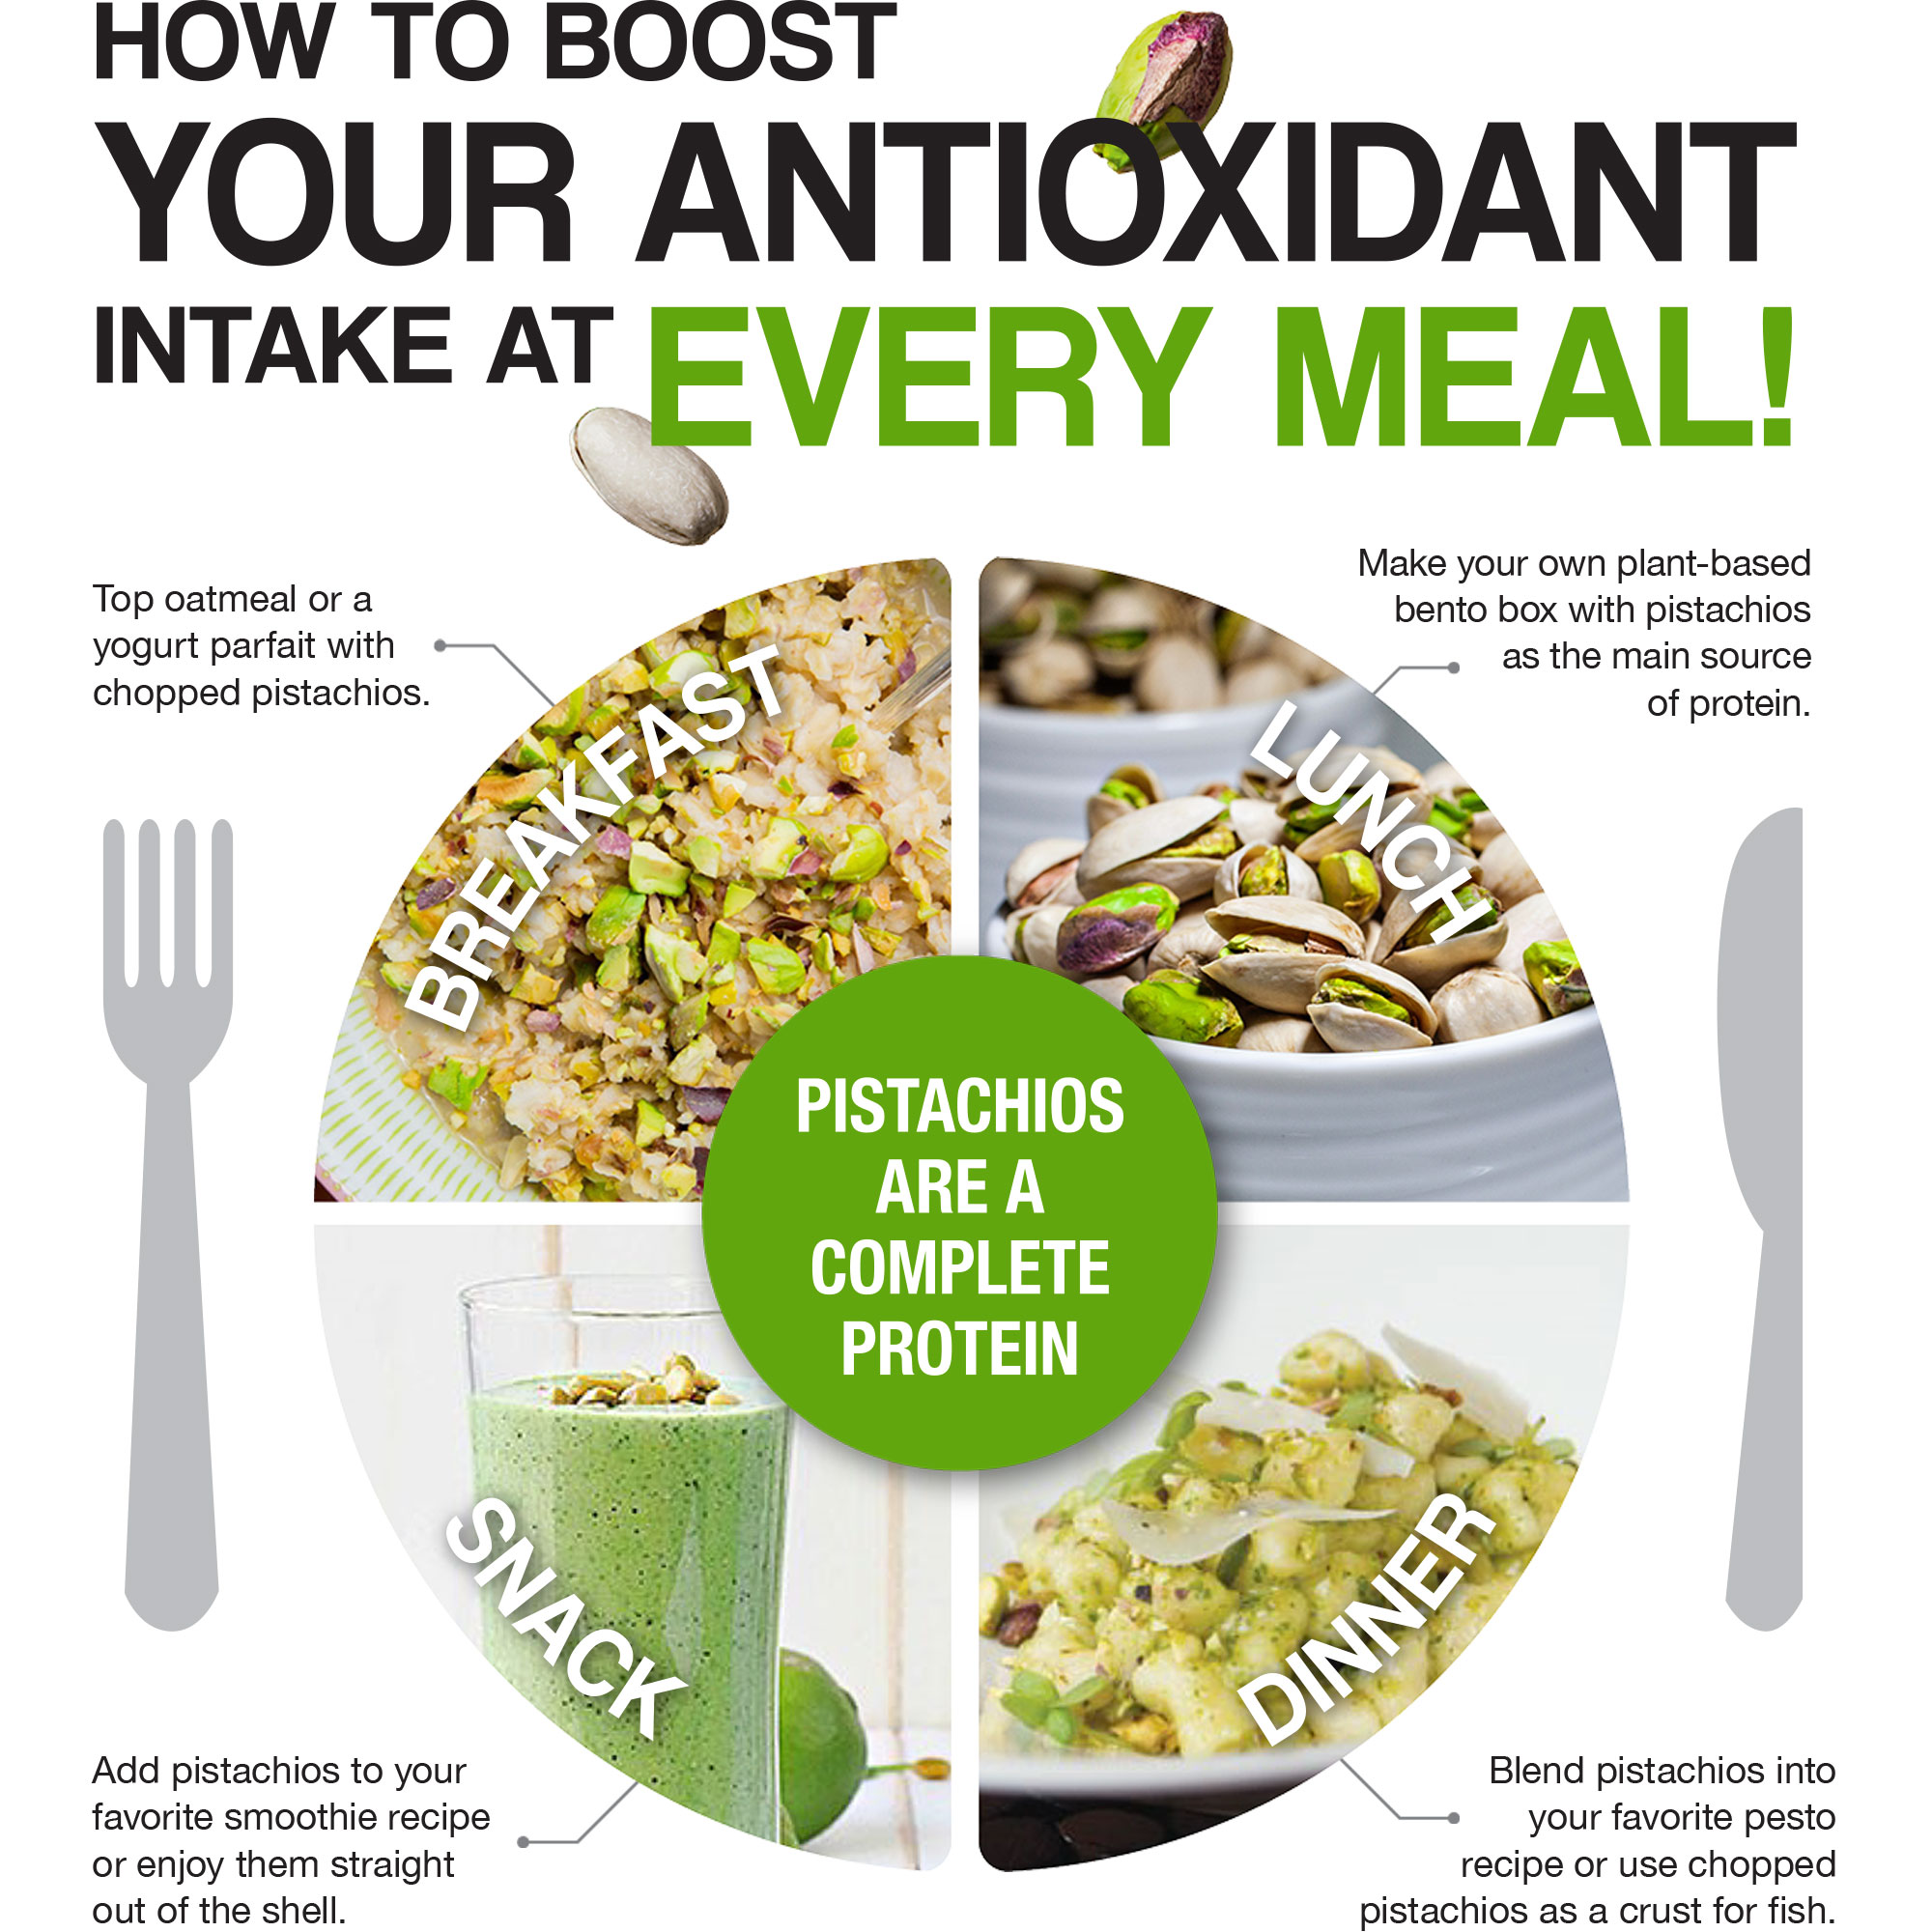 How to boost you antioxidant intake at every meal!